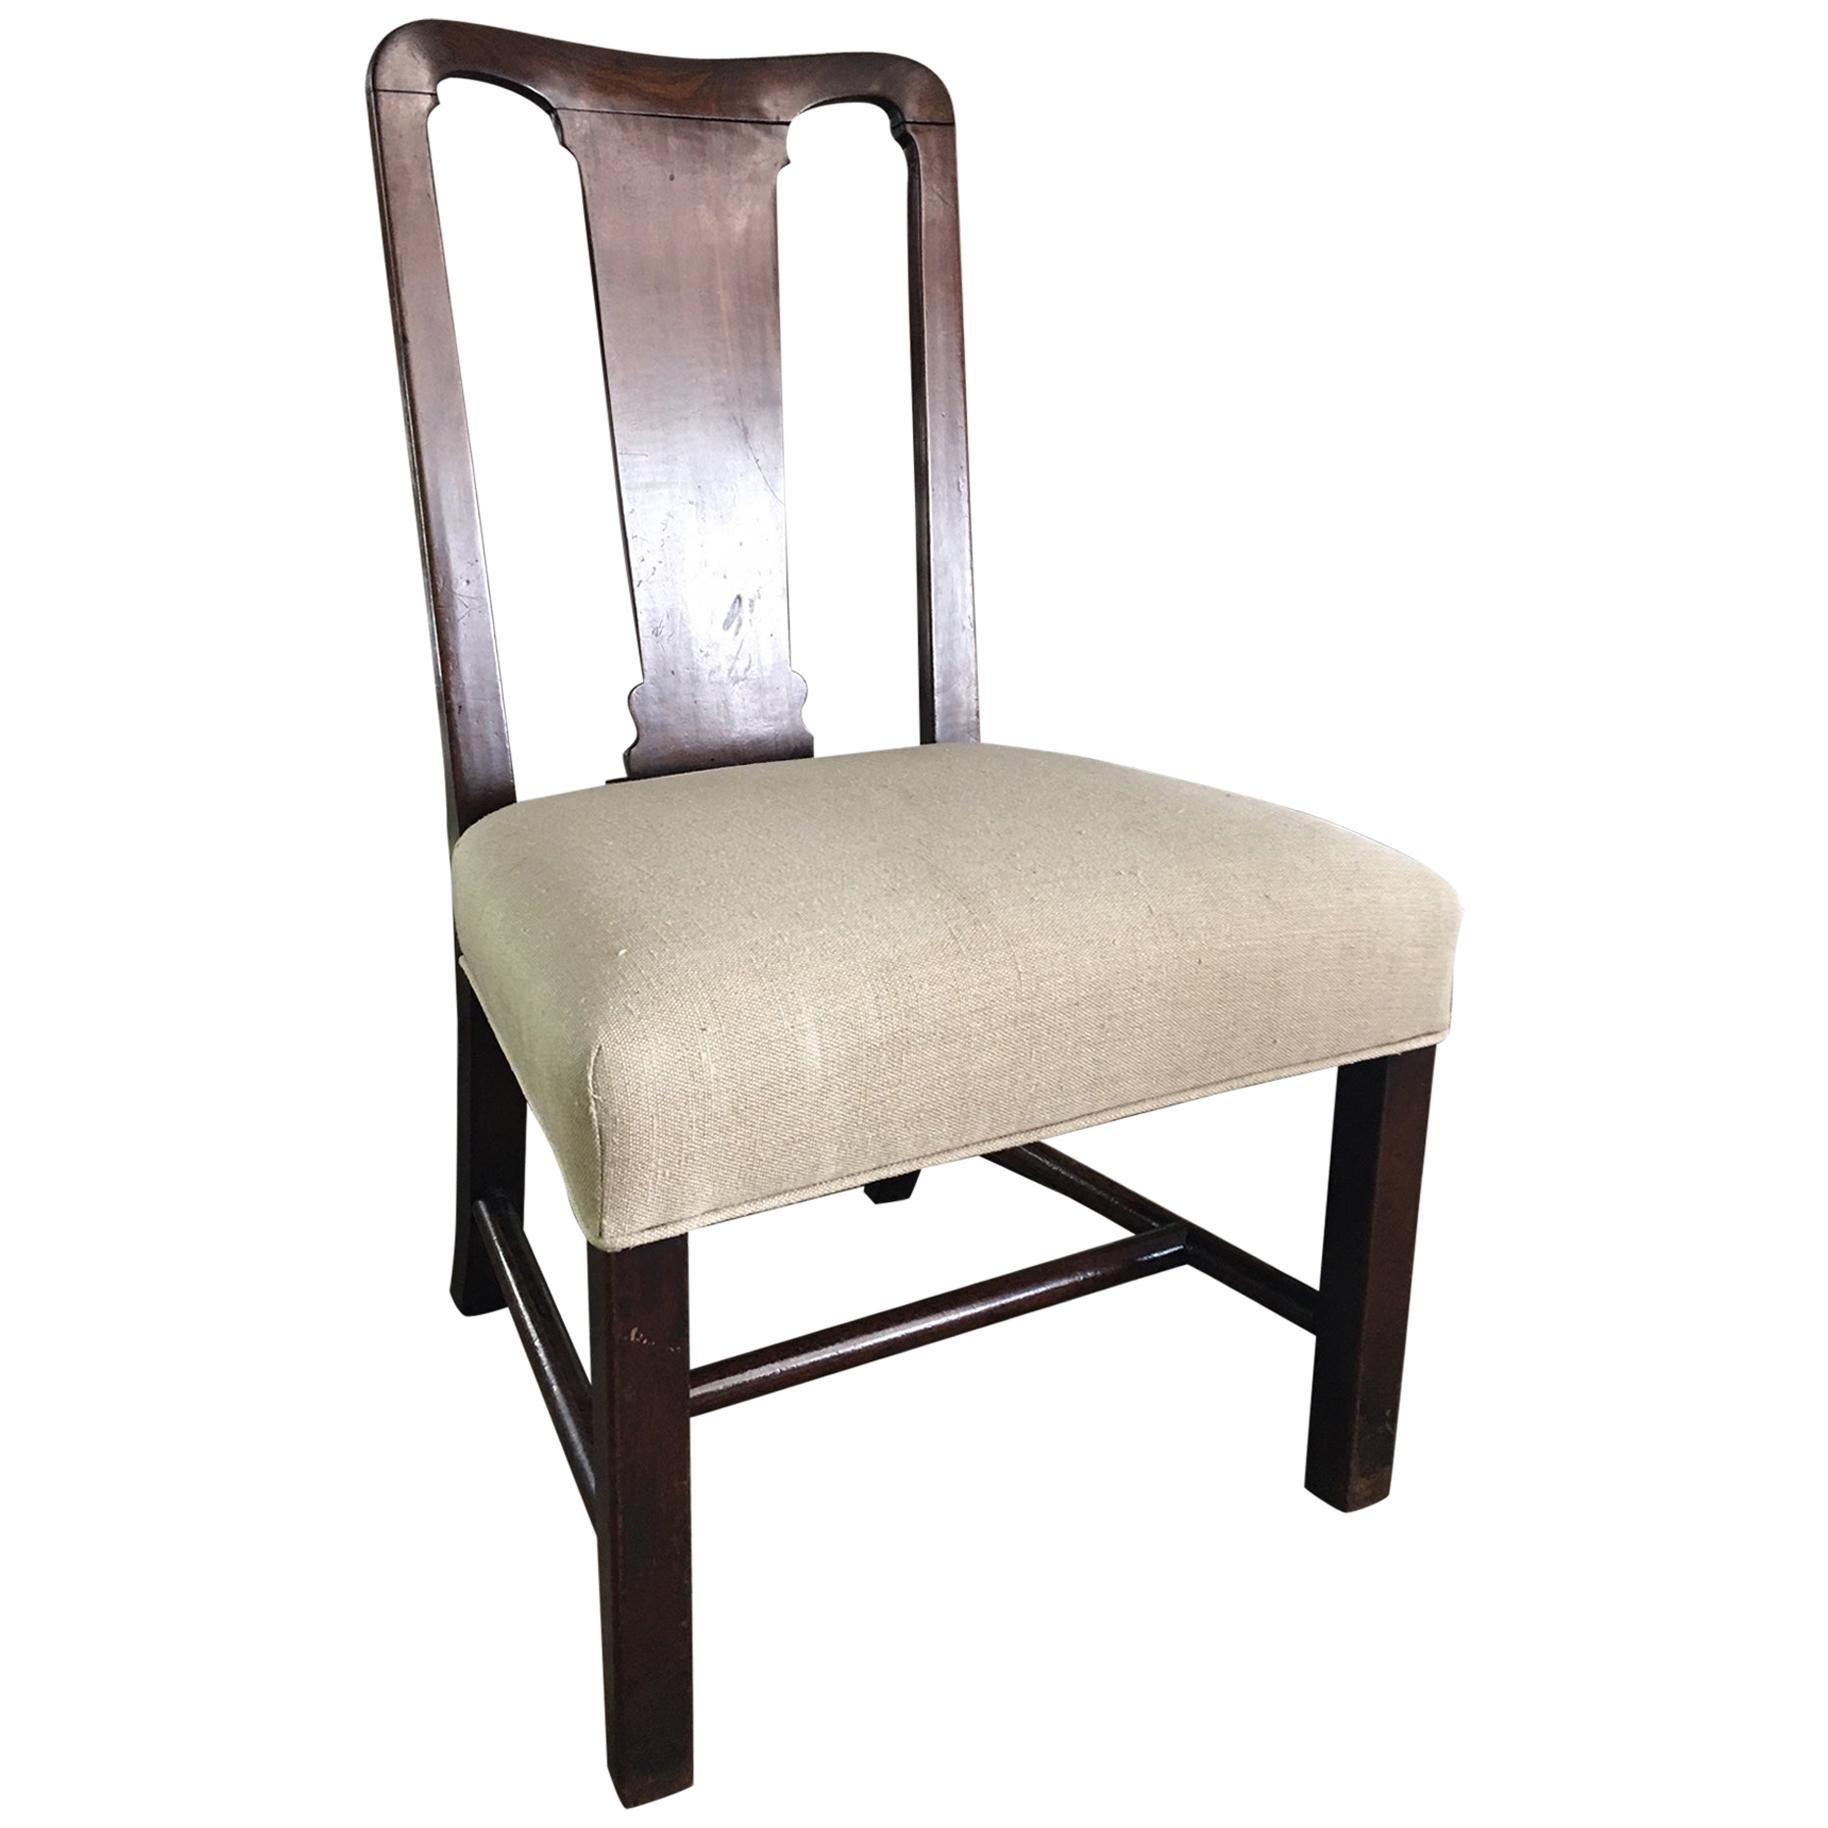 English George II Chippendale Chair, 18th Century